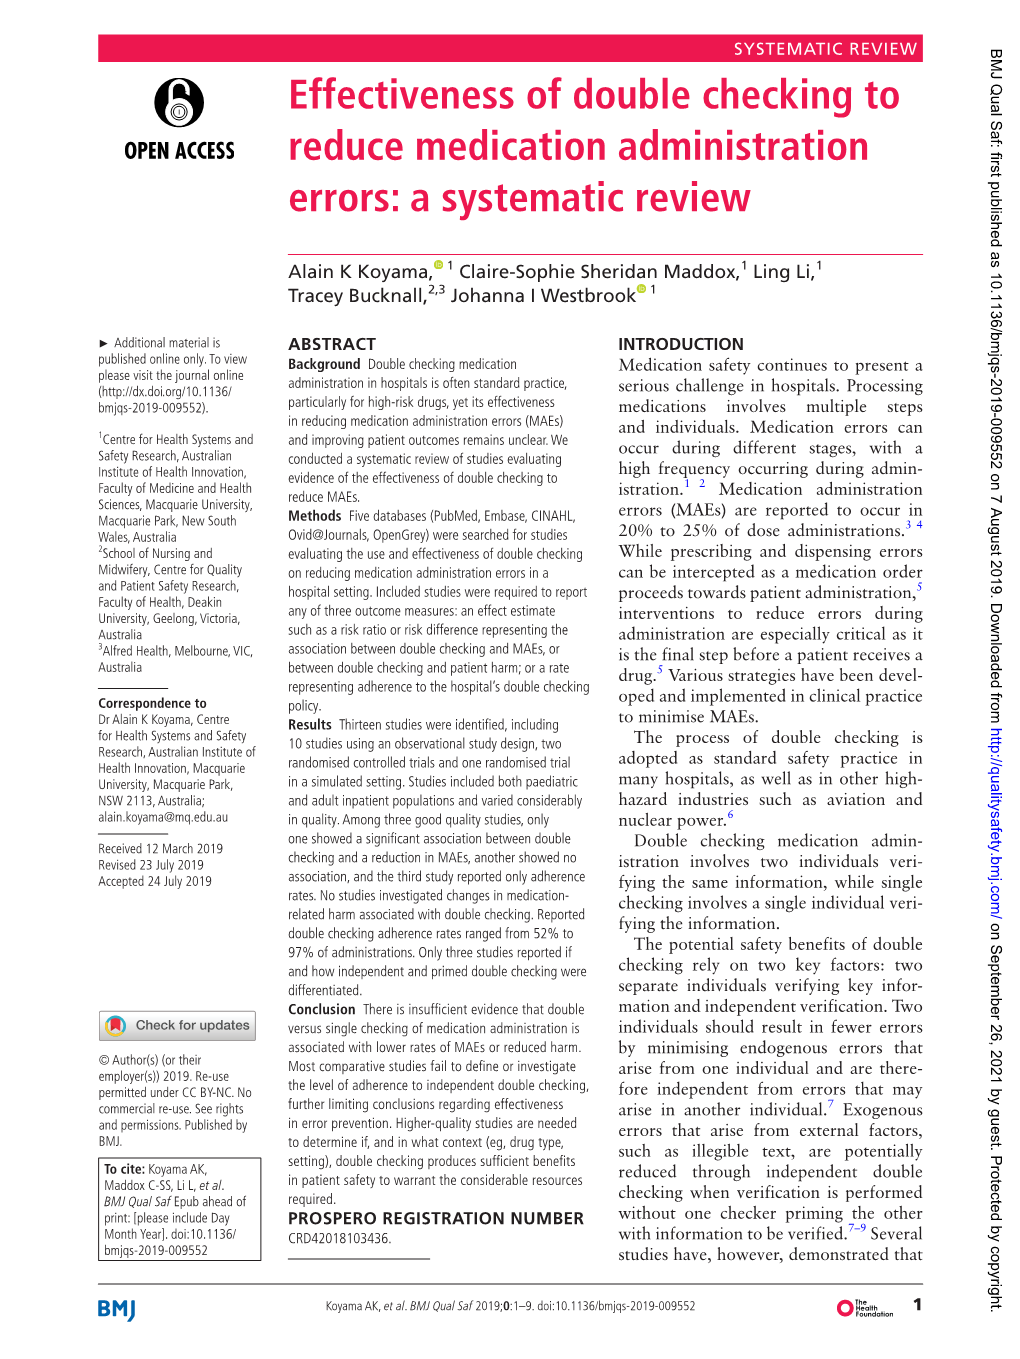 Effectiveness of Double Checking to Reduce Medication Administration Errors: a Systematic Review